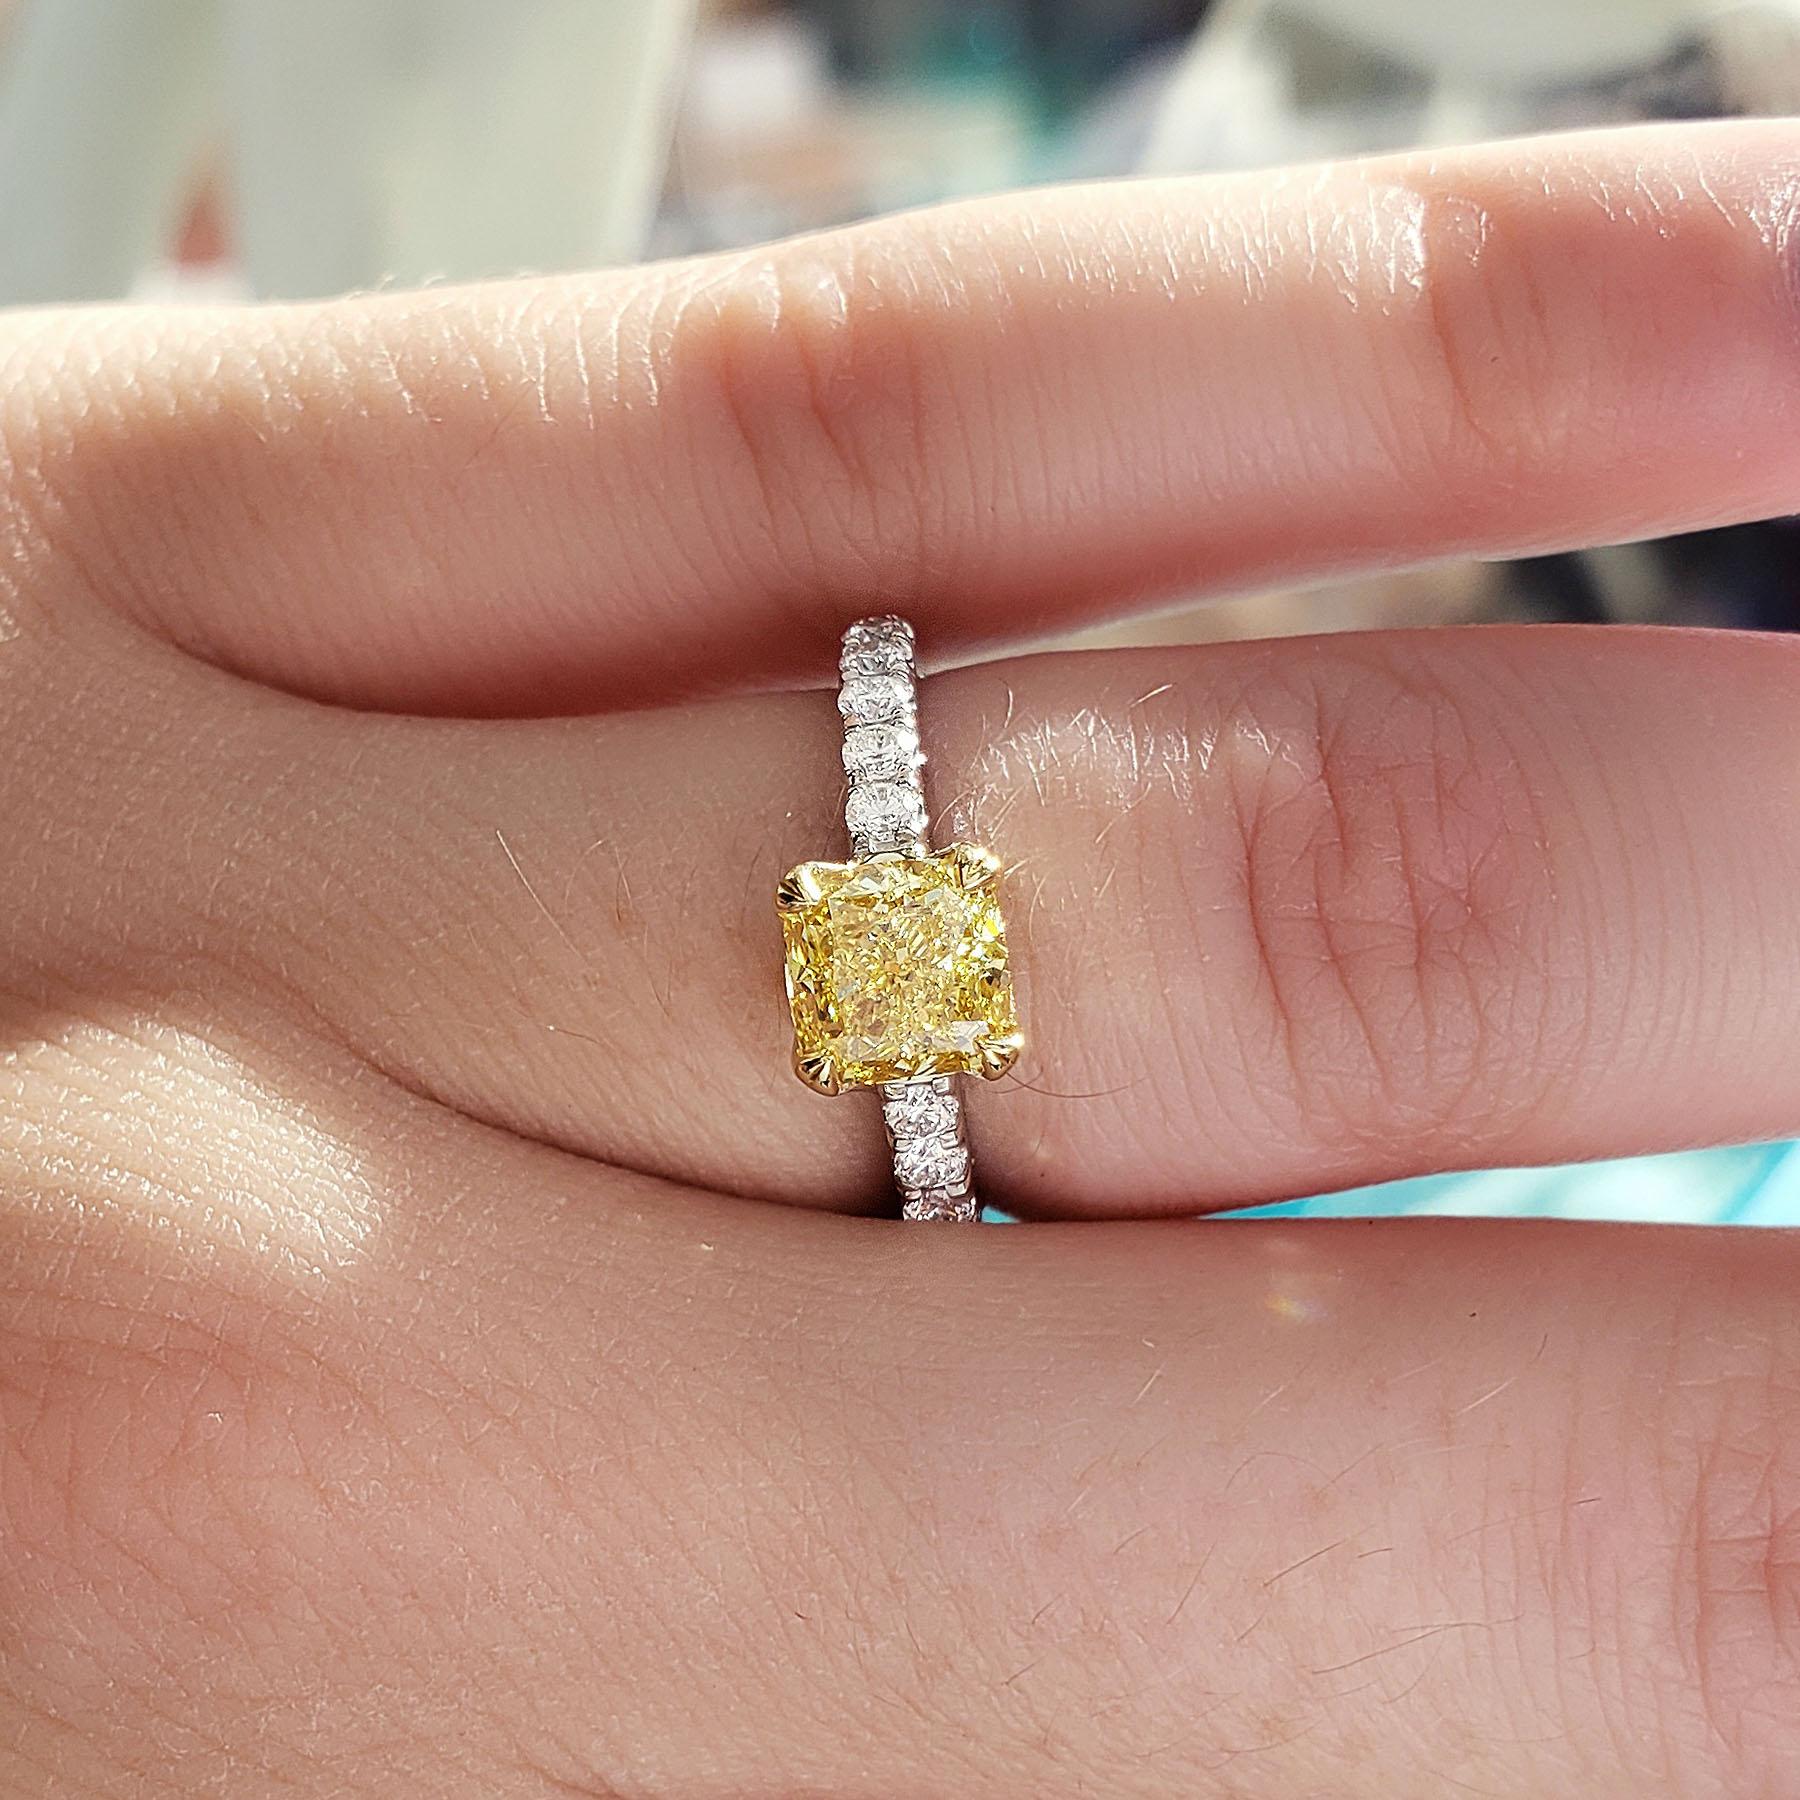  This beautiful canary diamond engagement ring flaunts a 1.00 Ct. Fancy Yellow Cushion cut diamond with SI1 clarity. Round cut diamonds (.25 ctw.) are placed down the shank in U-setting. 
Ring Details
Metal	: 18K Gold
Setting Type	: U-Pave
Total